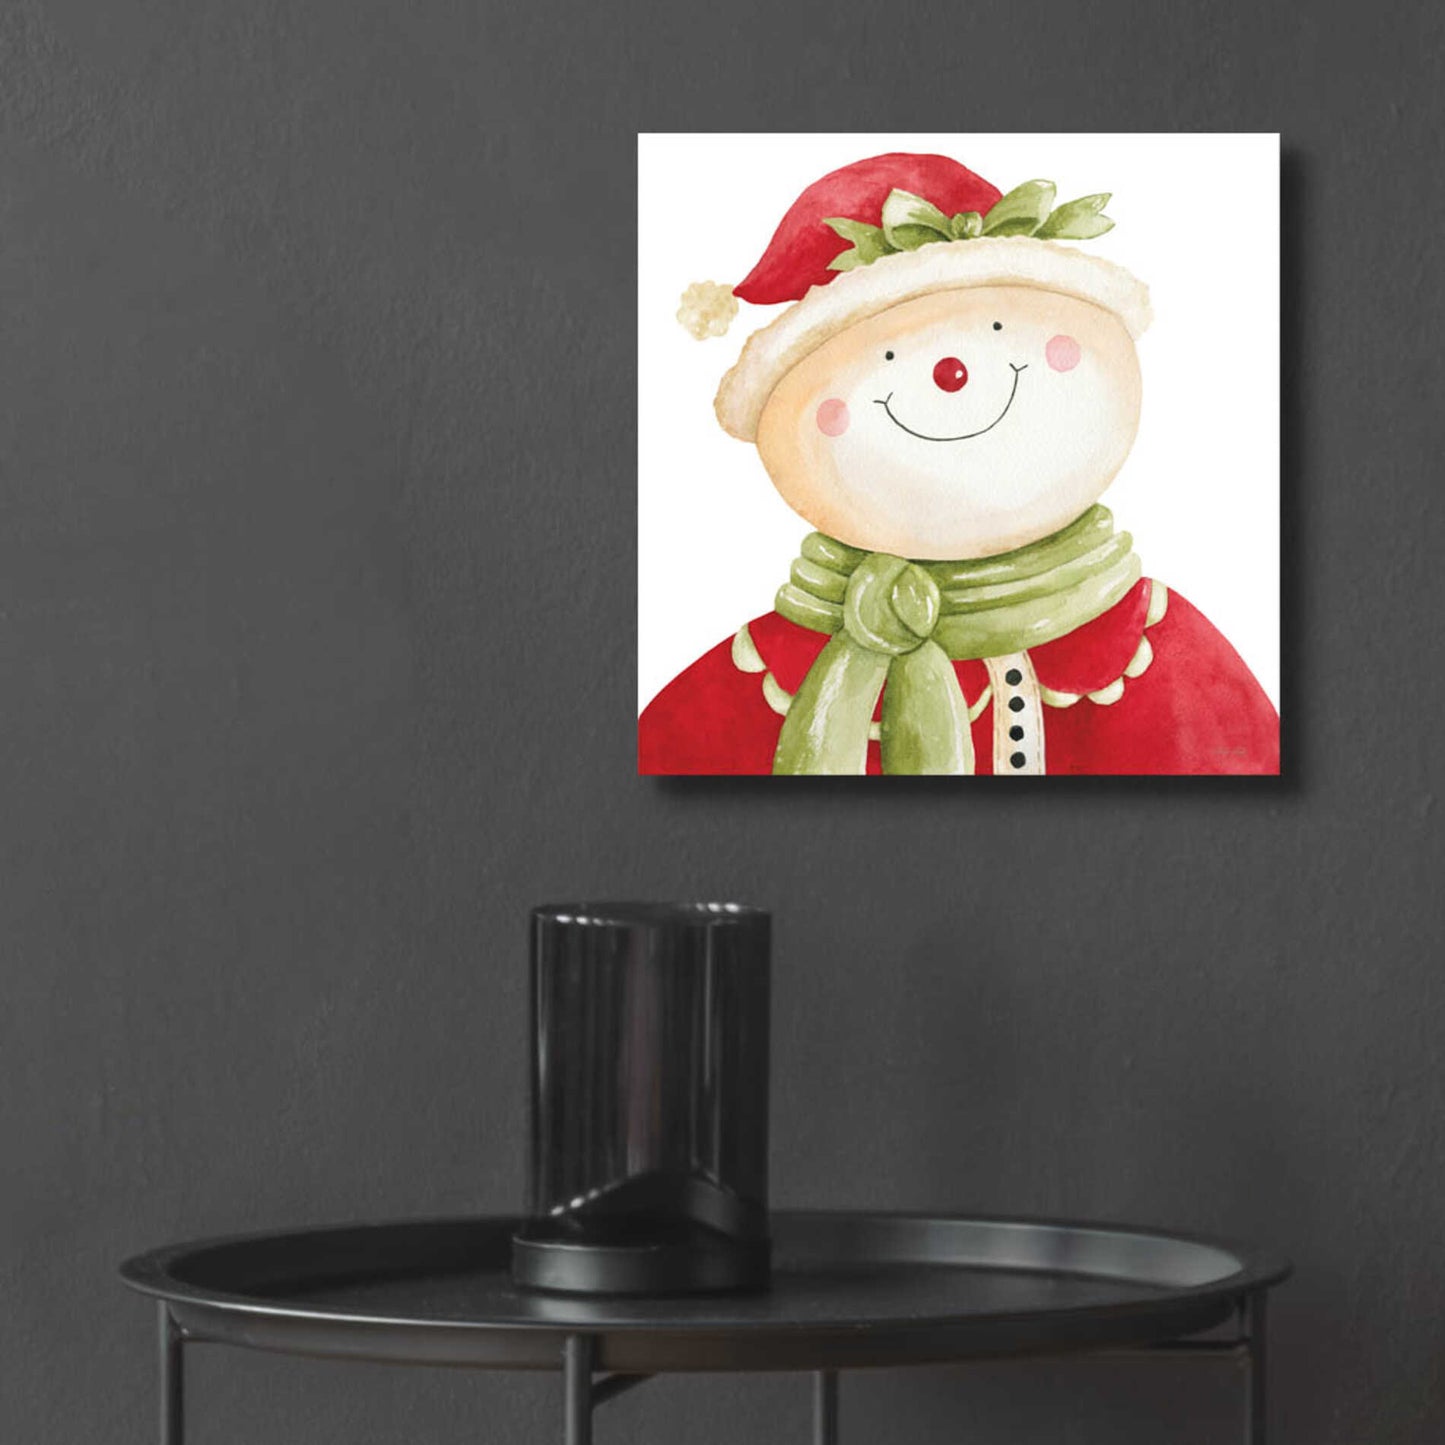 Epic Art 'Holiday Snowman' by Cindy Jacobs, Acrylic Glass Wall Art,12x12